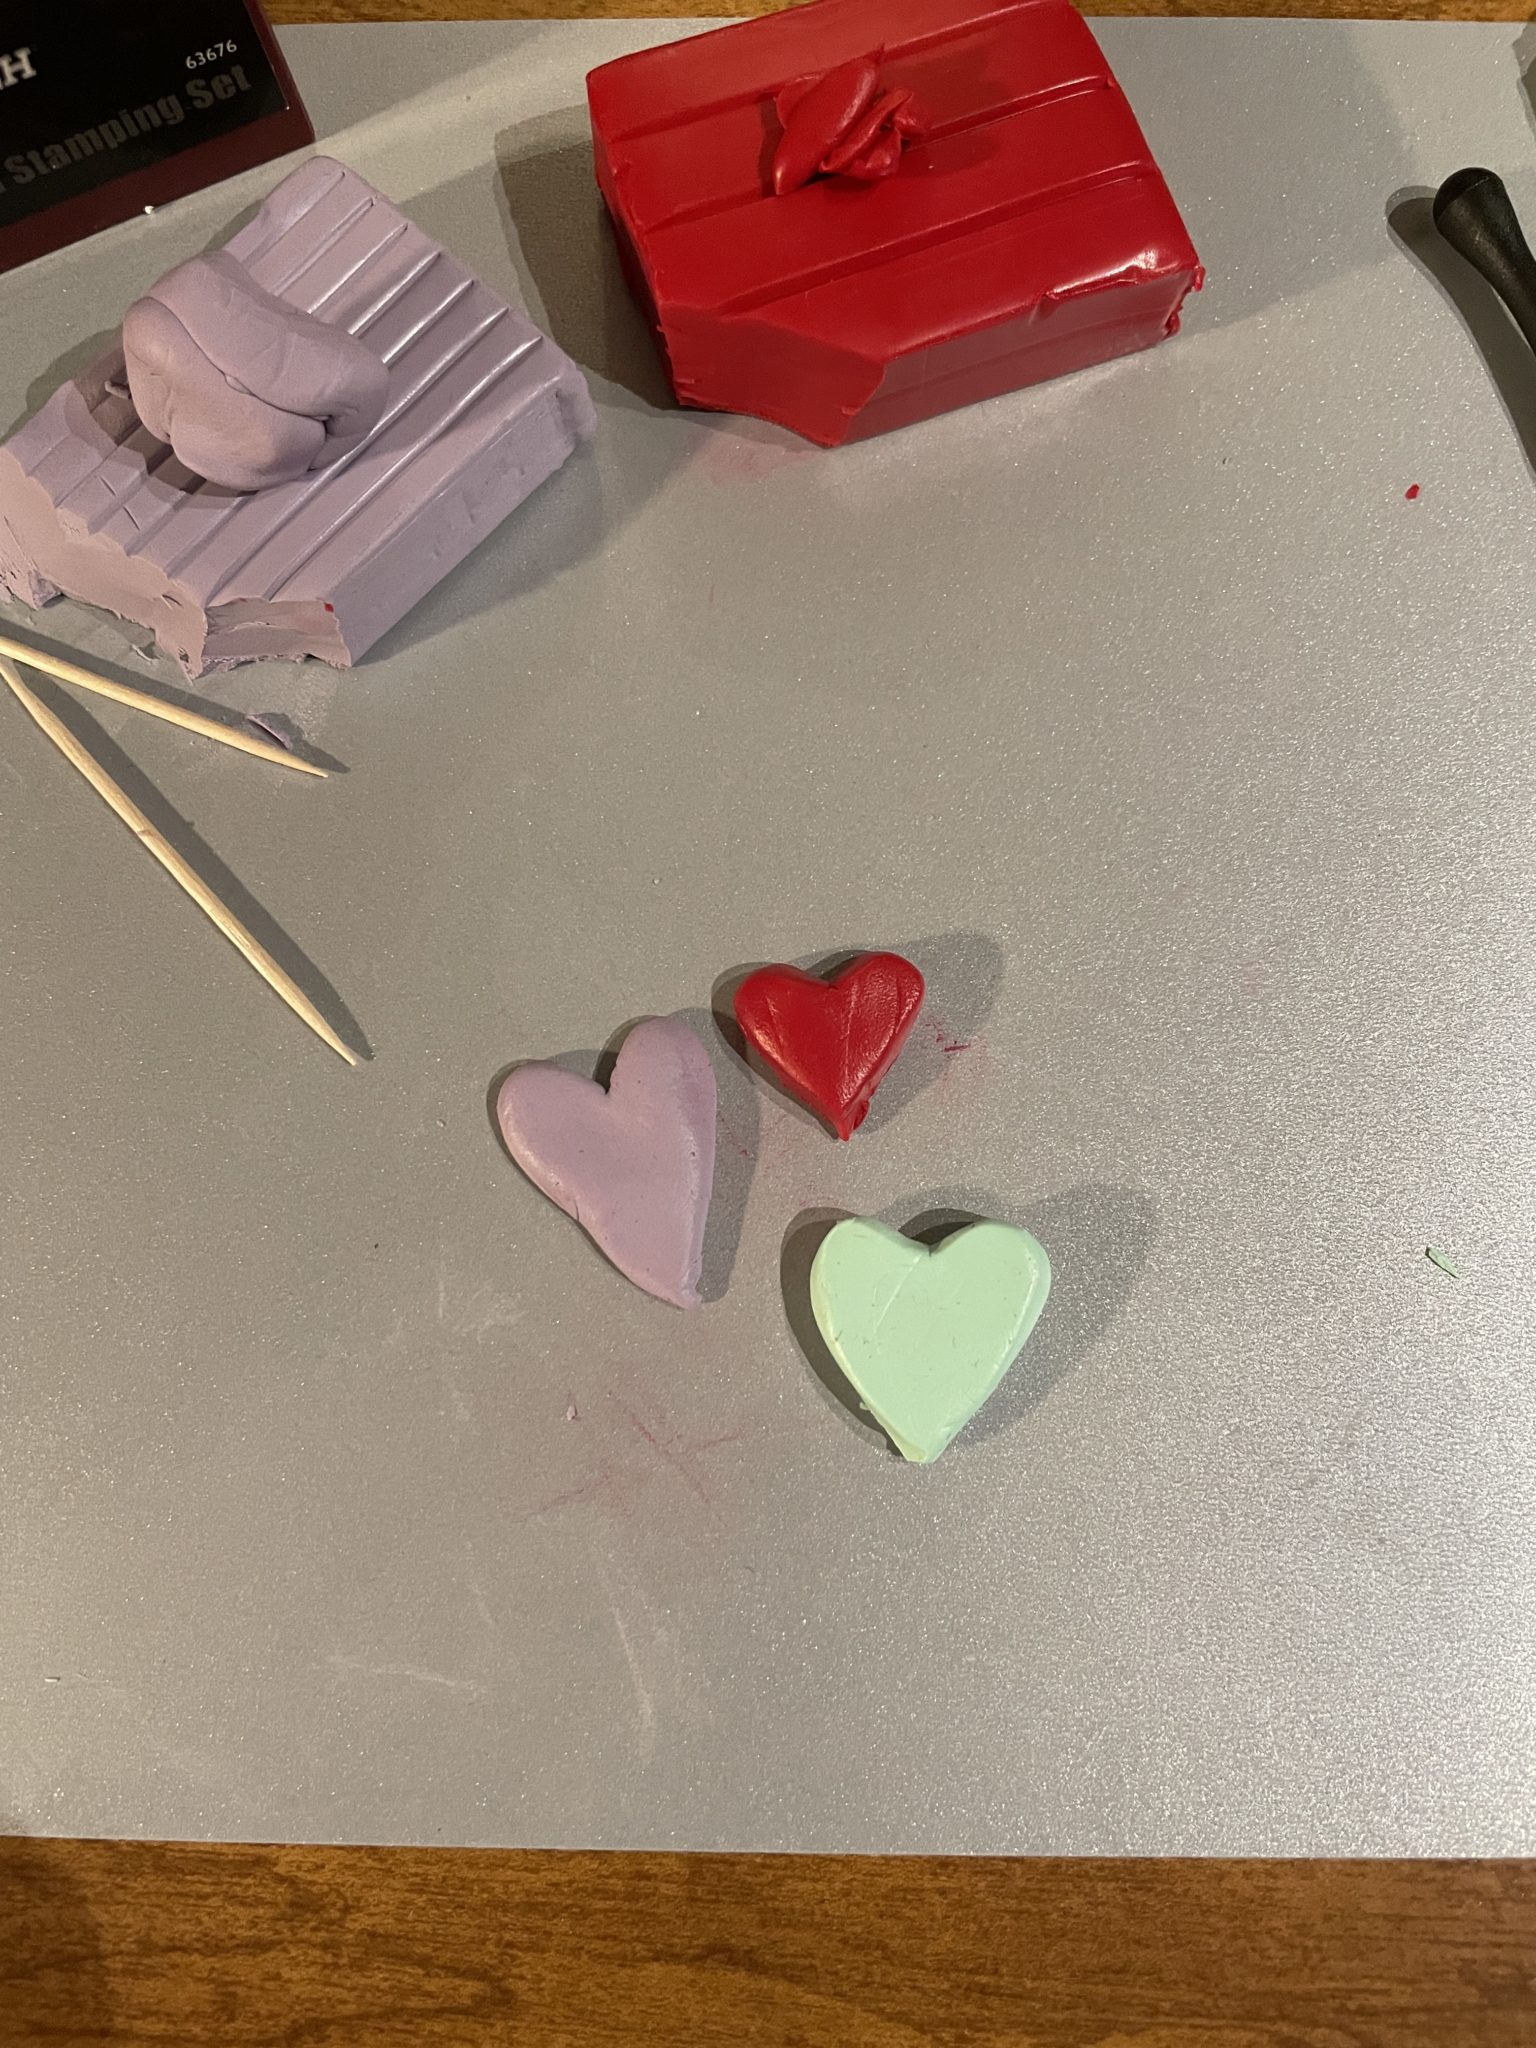 Close-up photo of three clay hearts in various sizes and colors: the smallest heart in red, the medium-sized heart in mint green, and the largest clay heart in lilac.